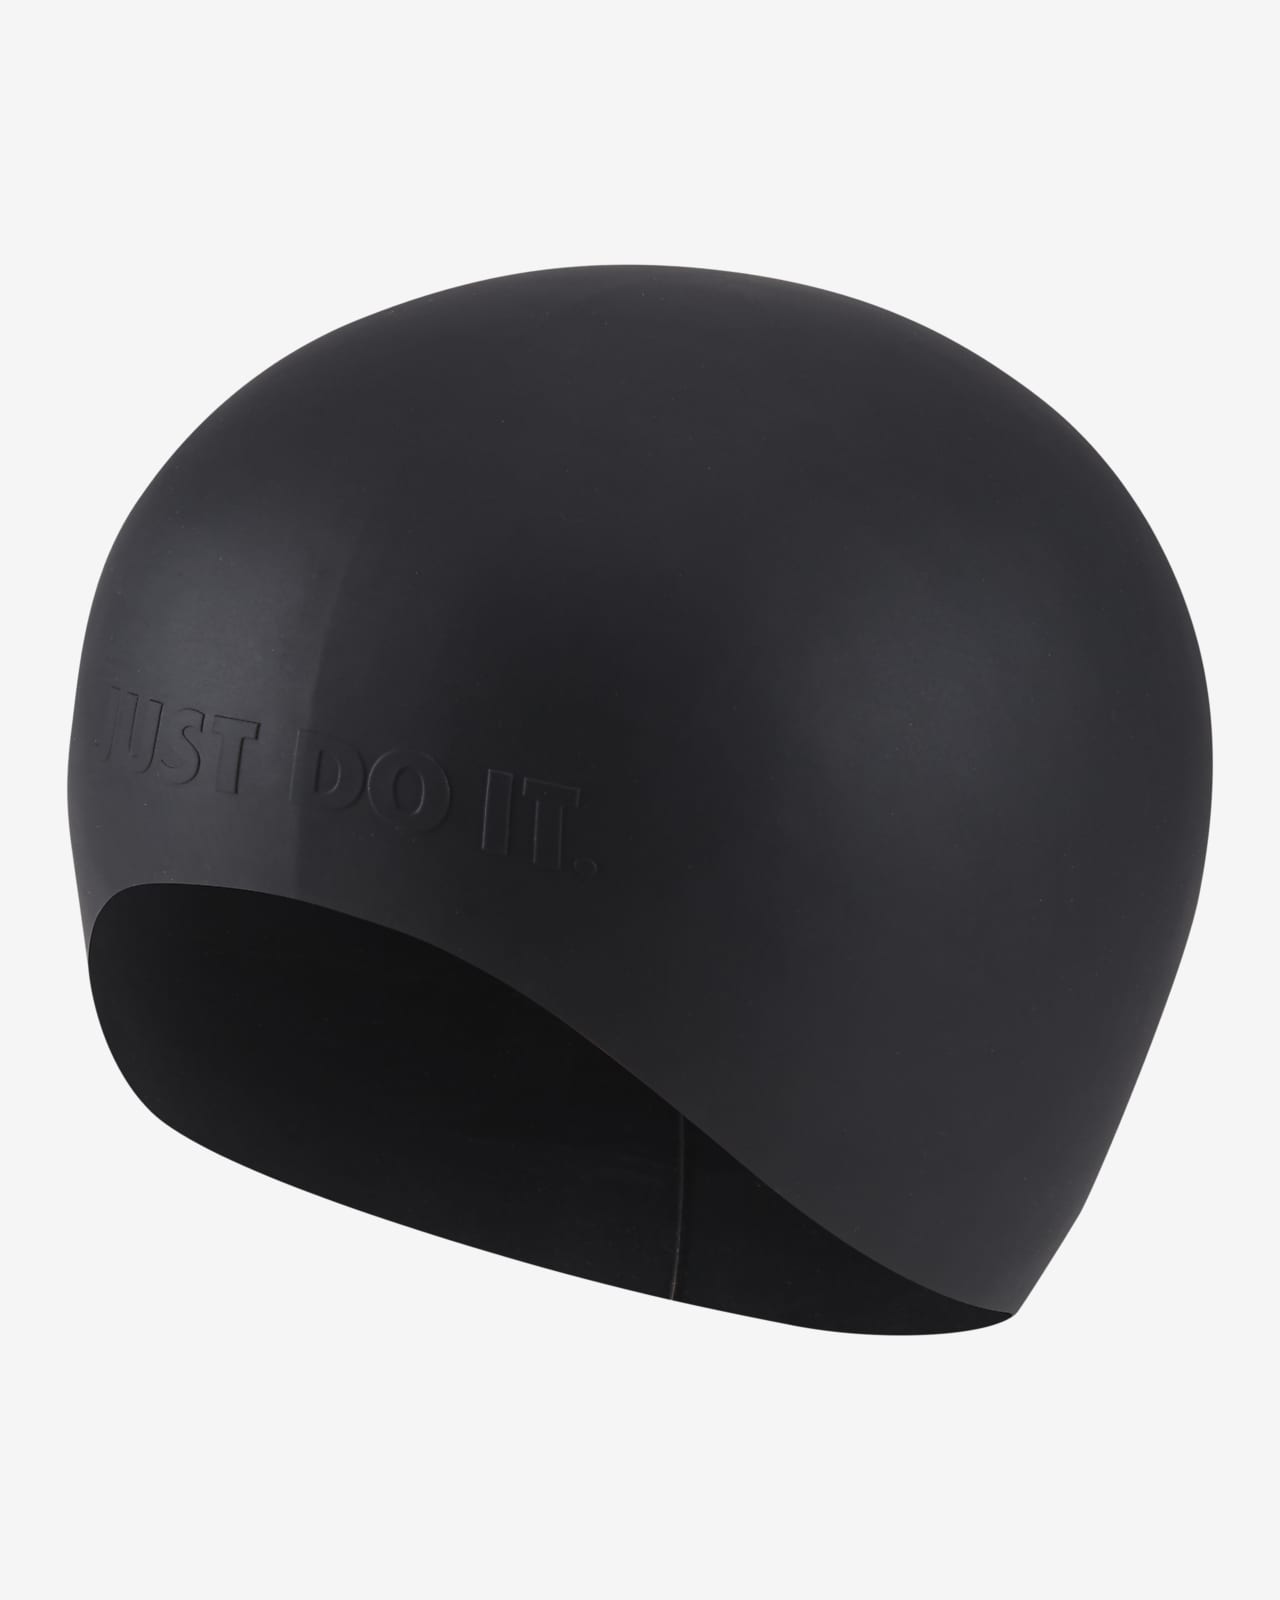 Nike Solid Long Hair Silicone Training Cap.